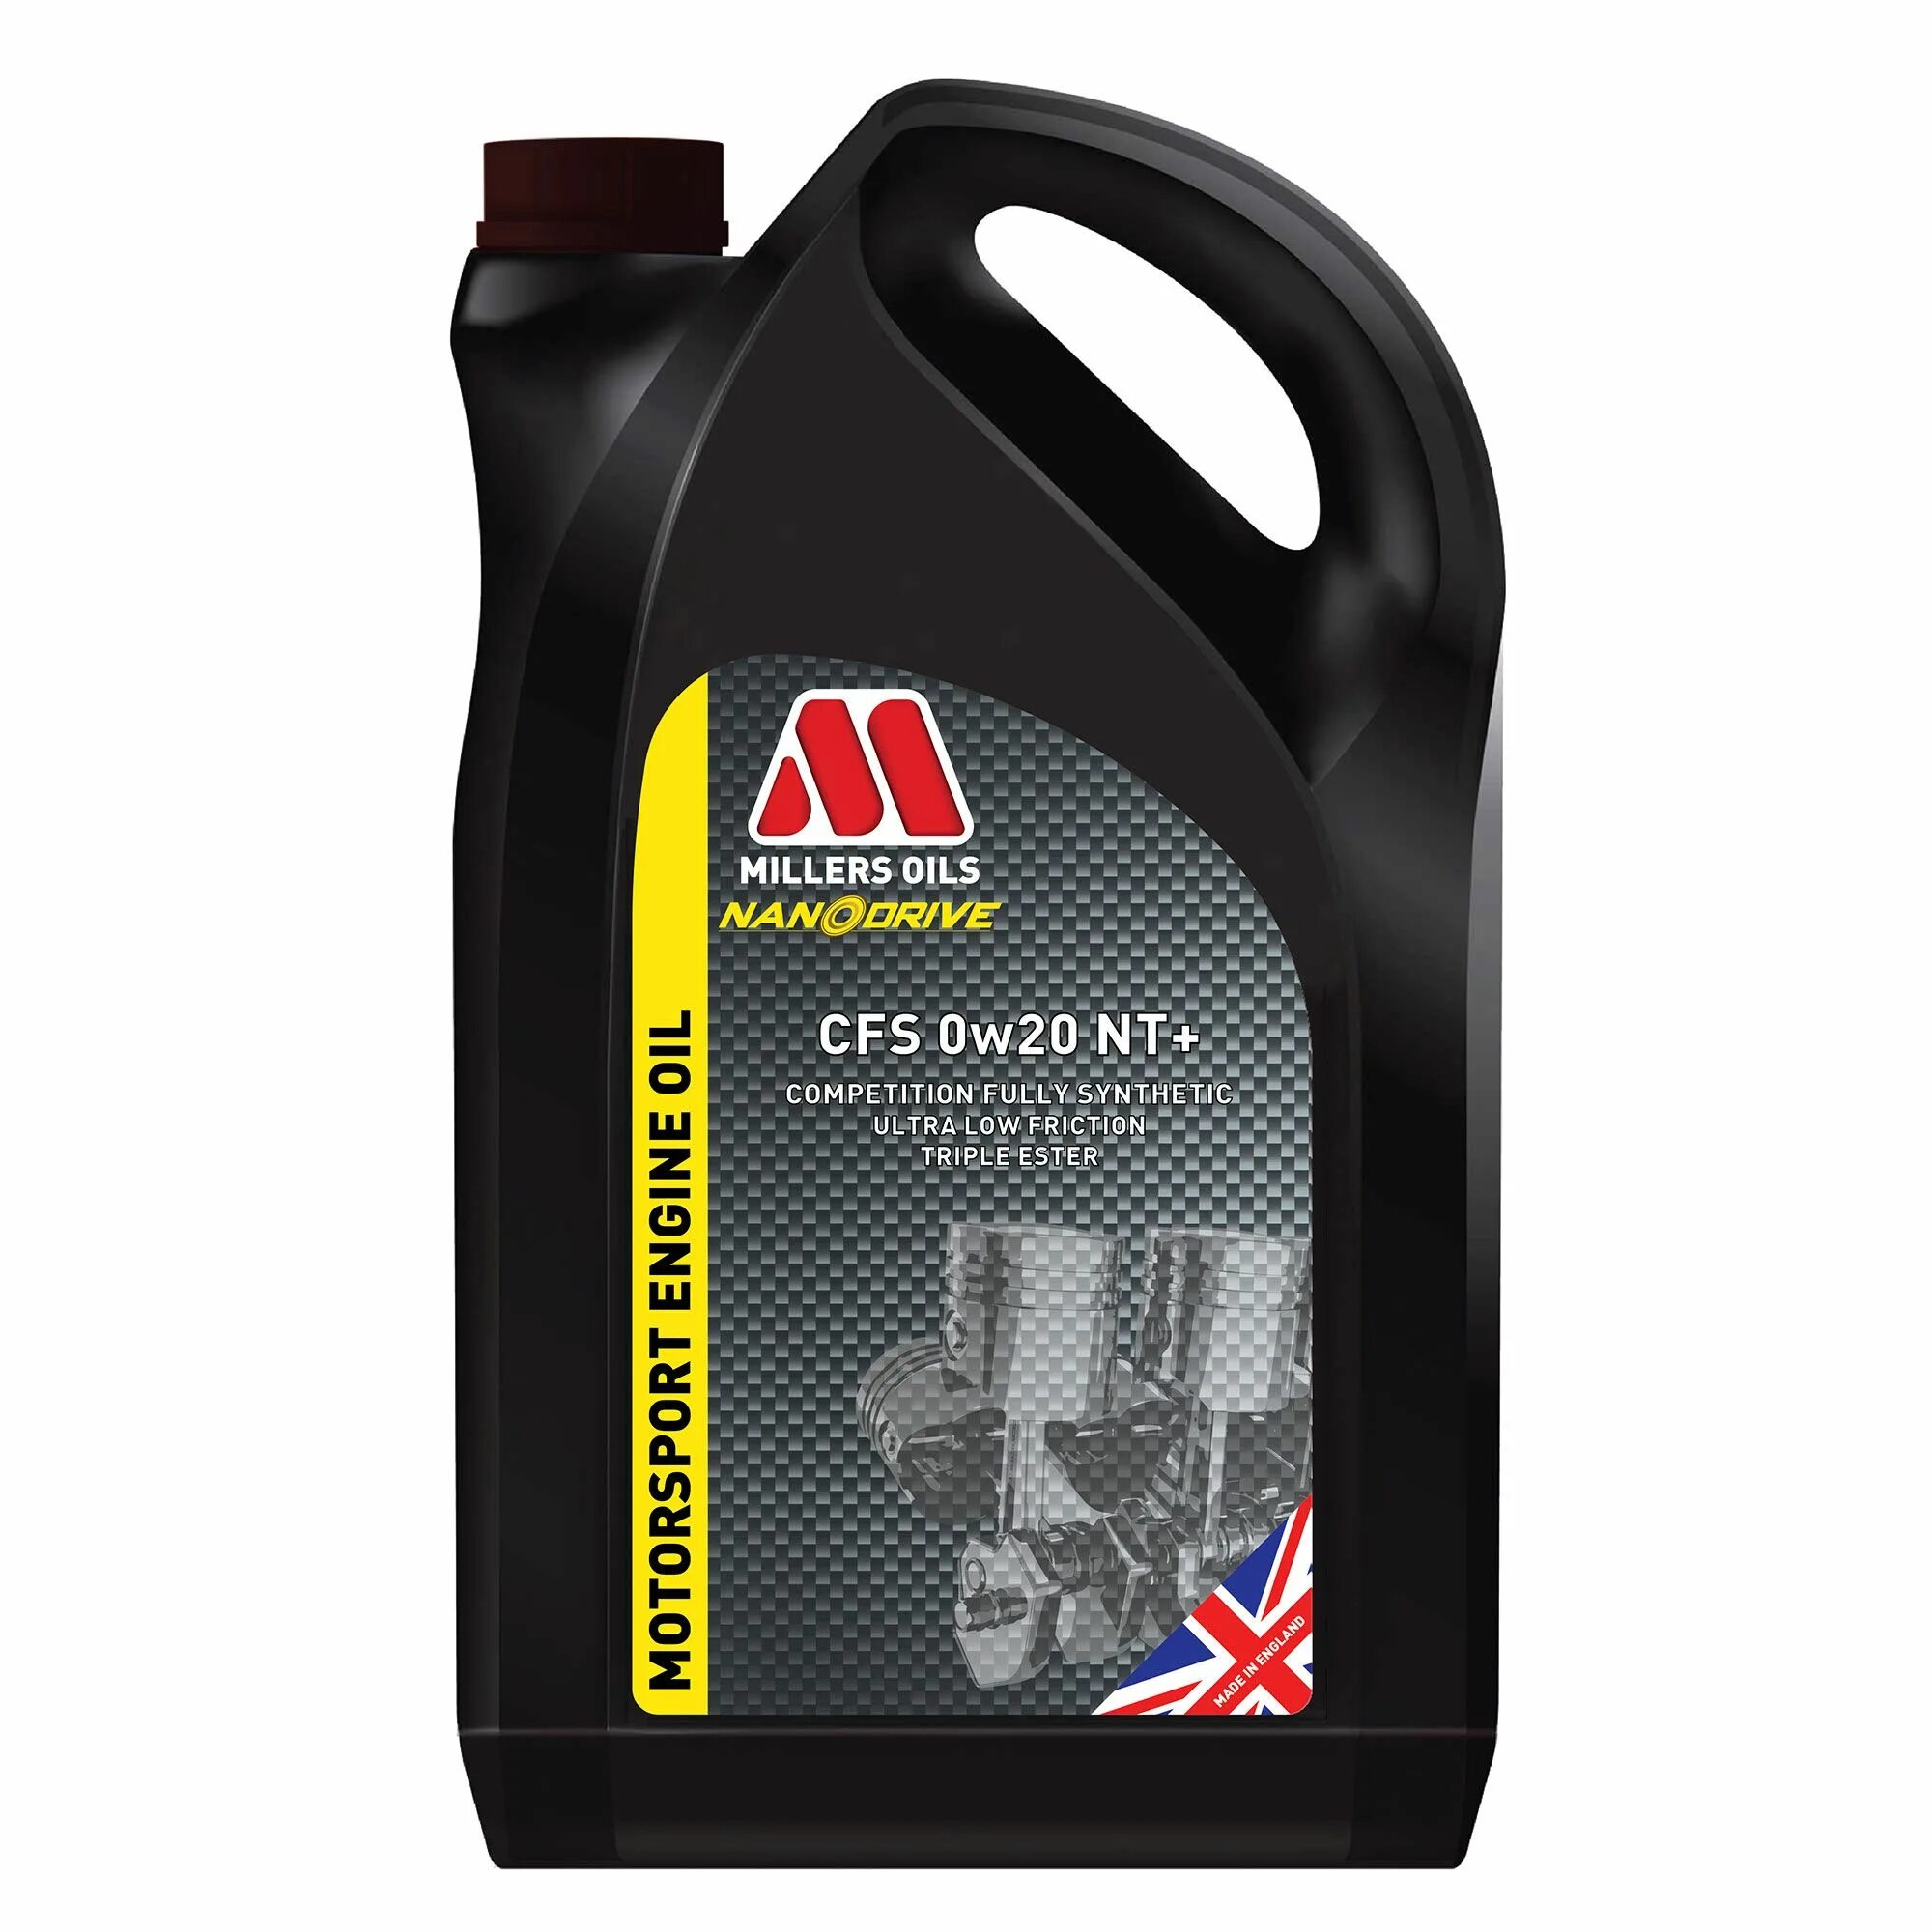 Масло performance. Fully Synthetic 5w40. X-Oil масло 20w-50 Diesel. Millers Oils XF long Life 5w40. MT-01 масло.